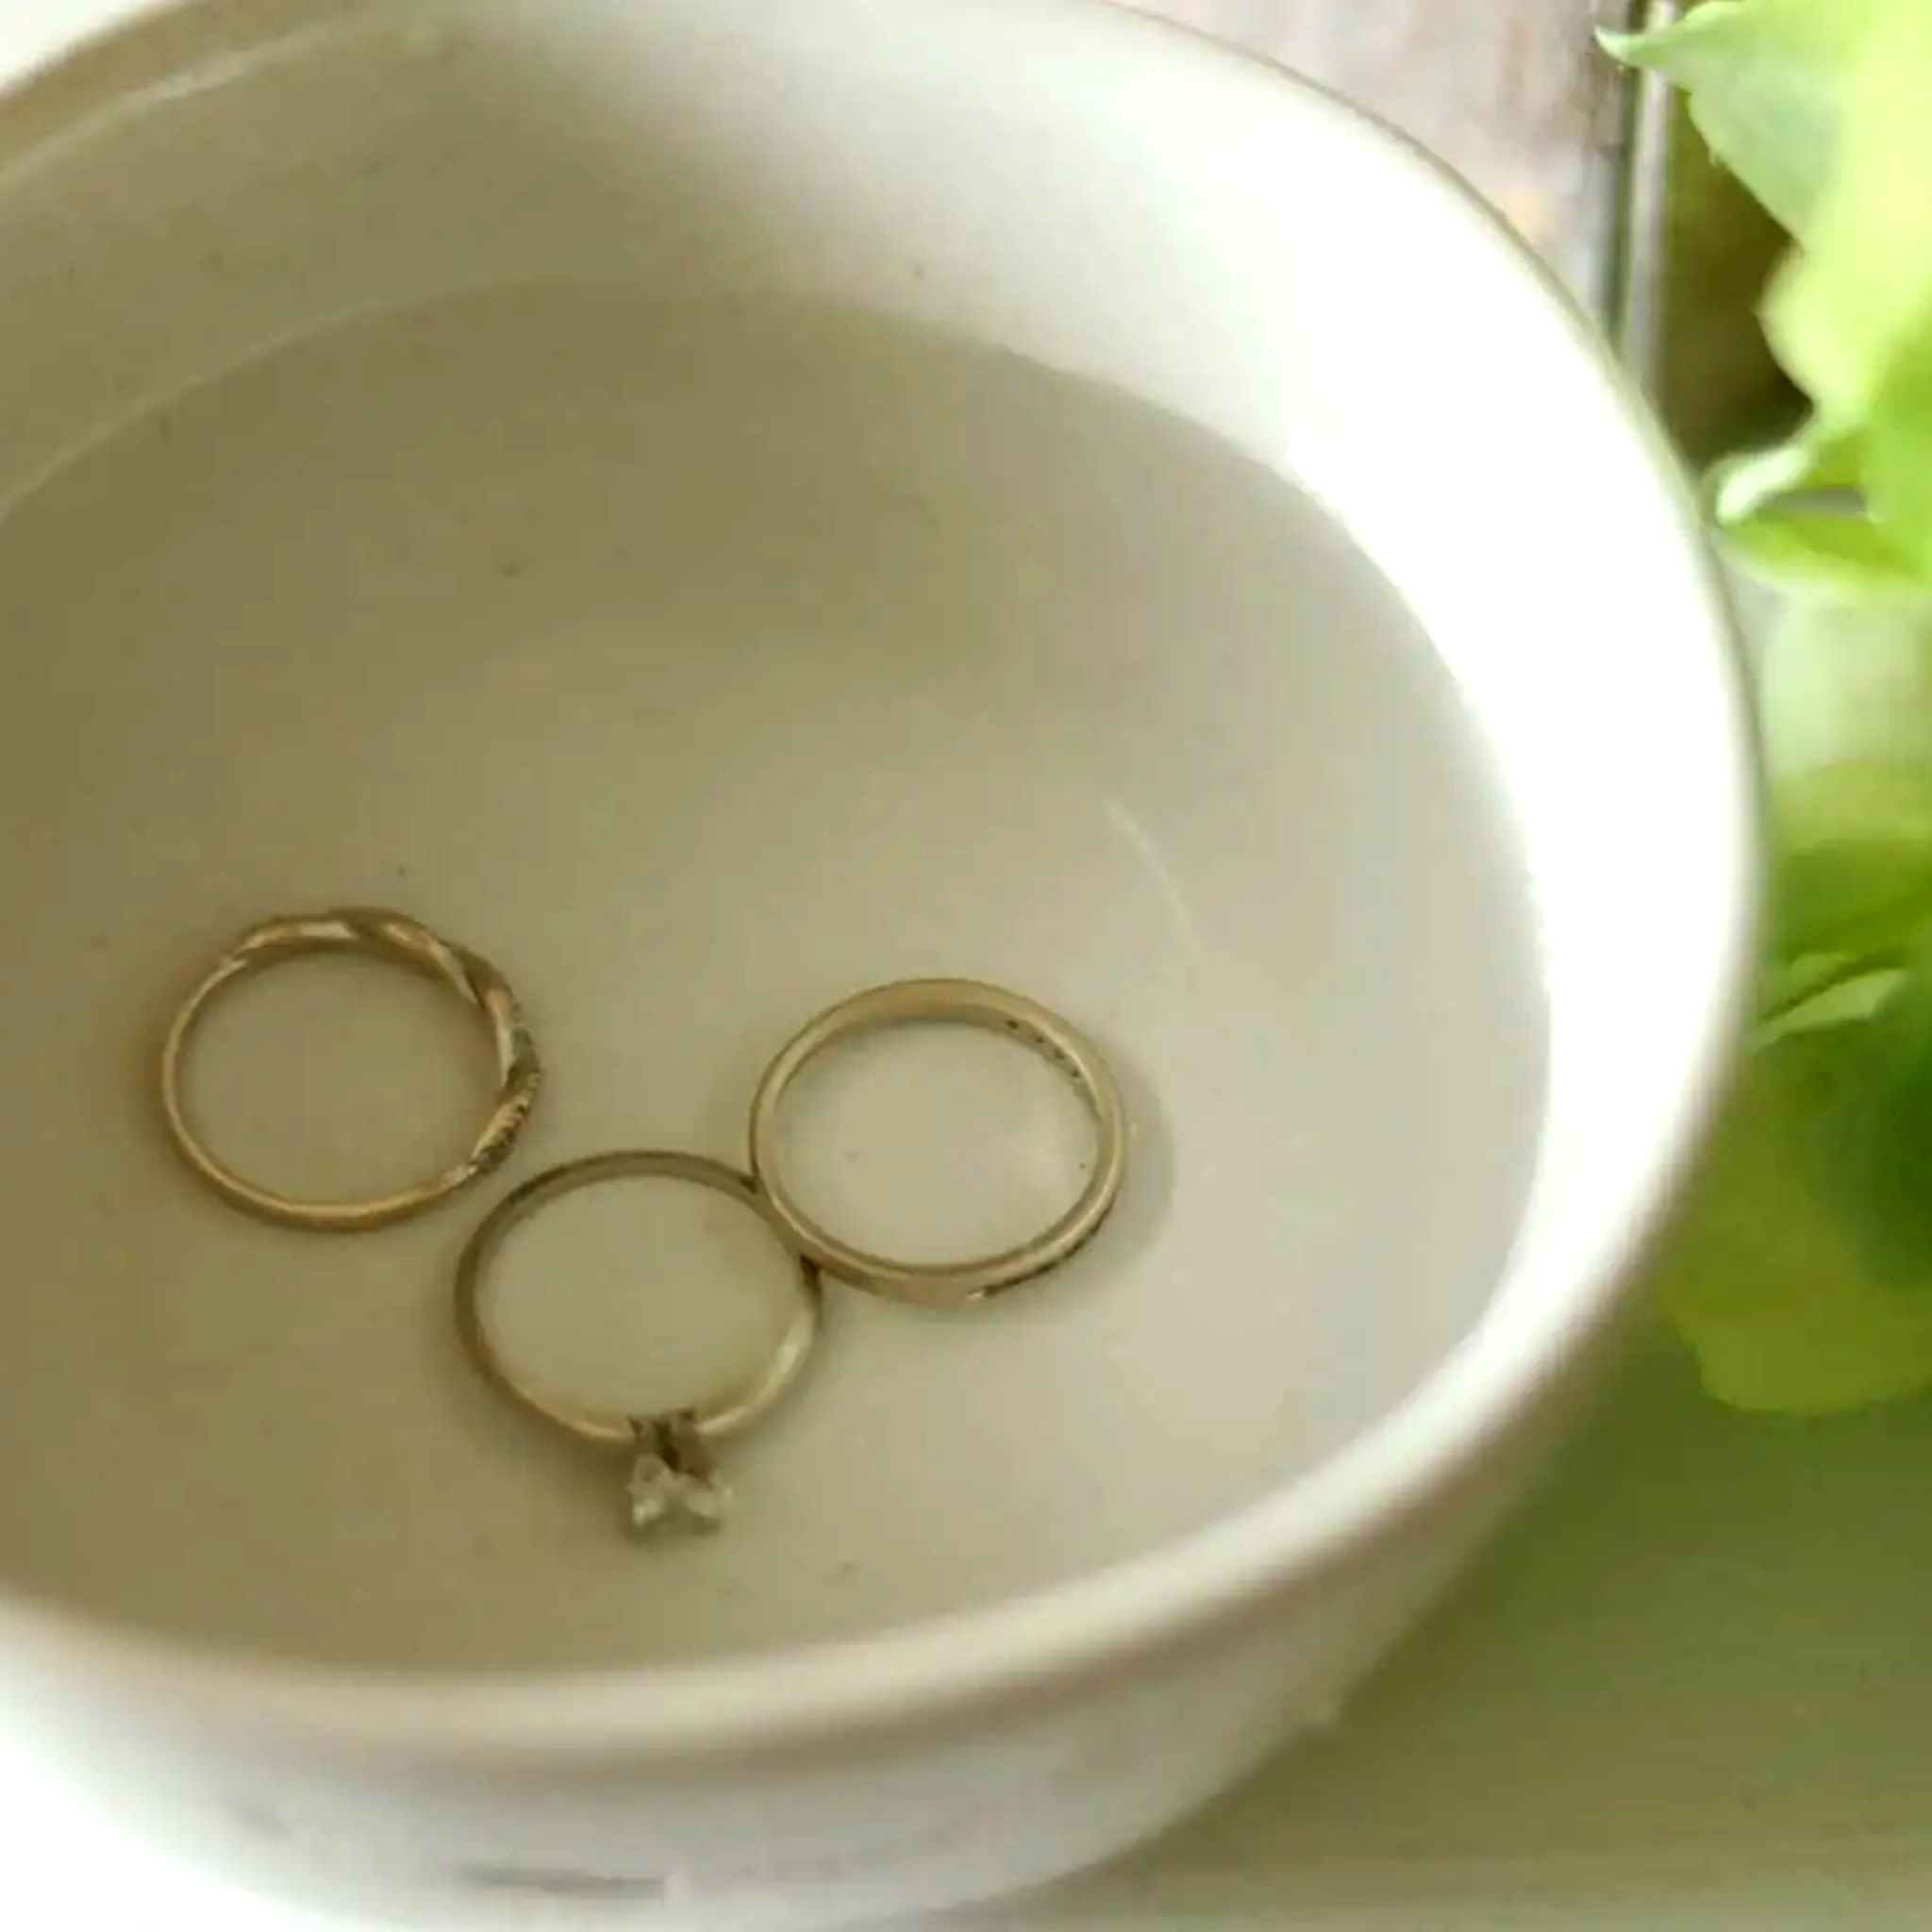 Homemade Jewelry Cleaner | Coll Writes